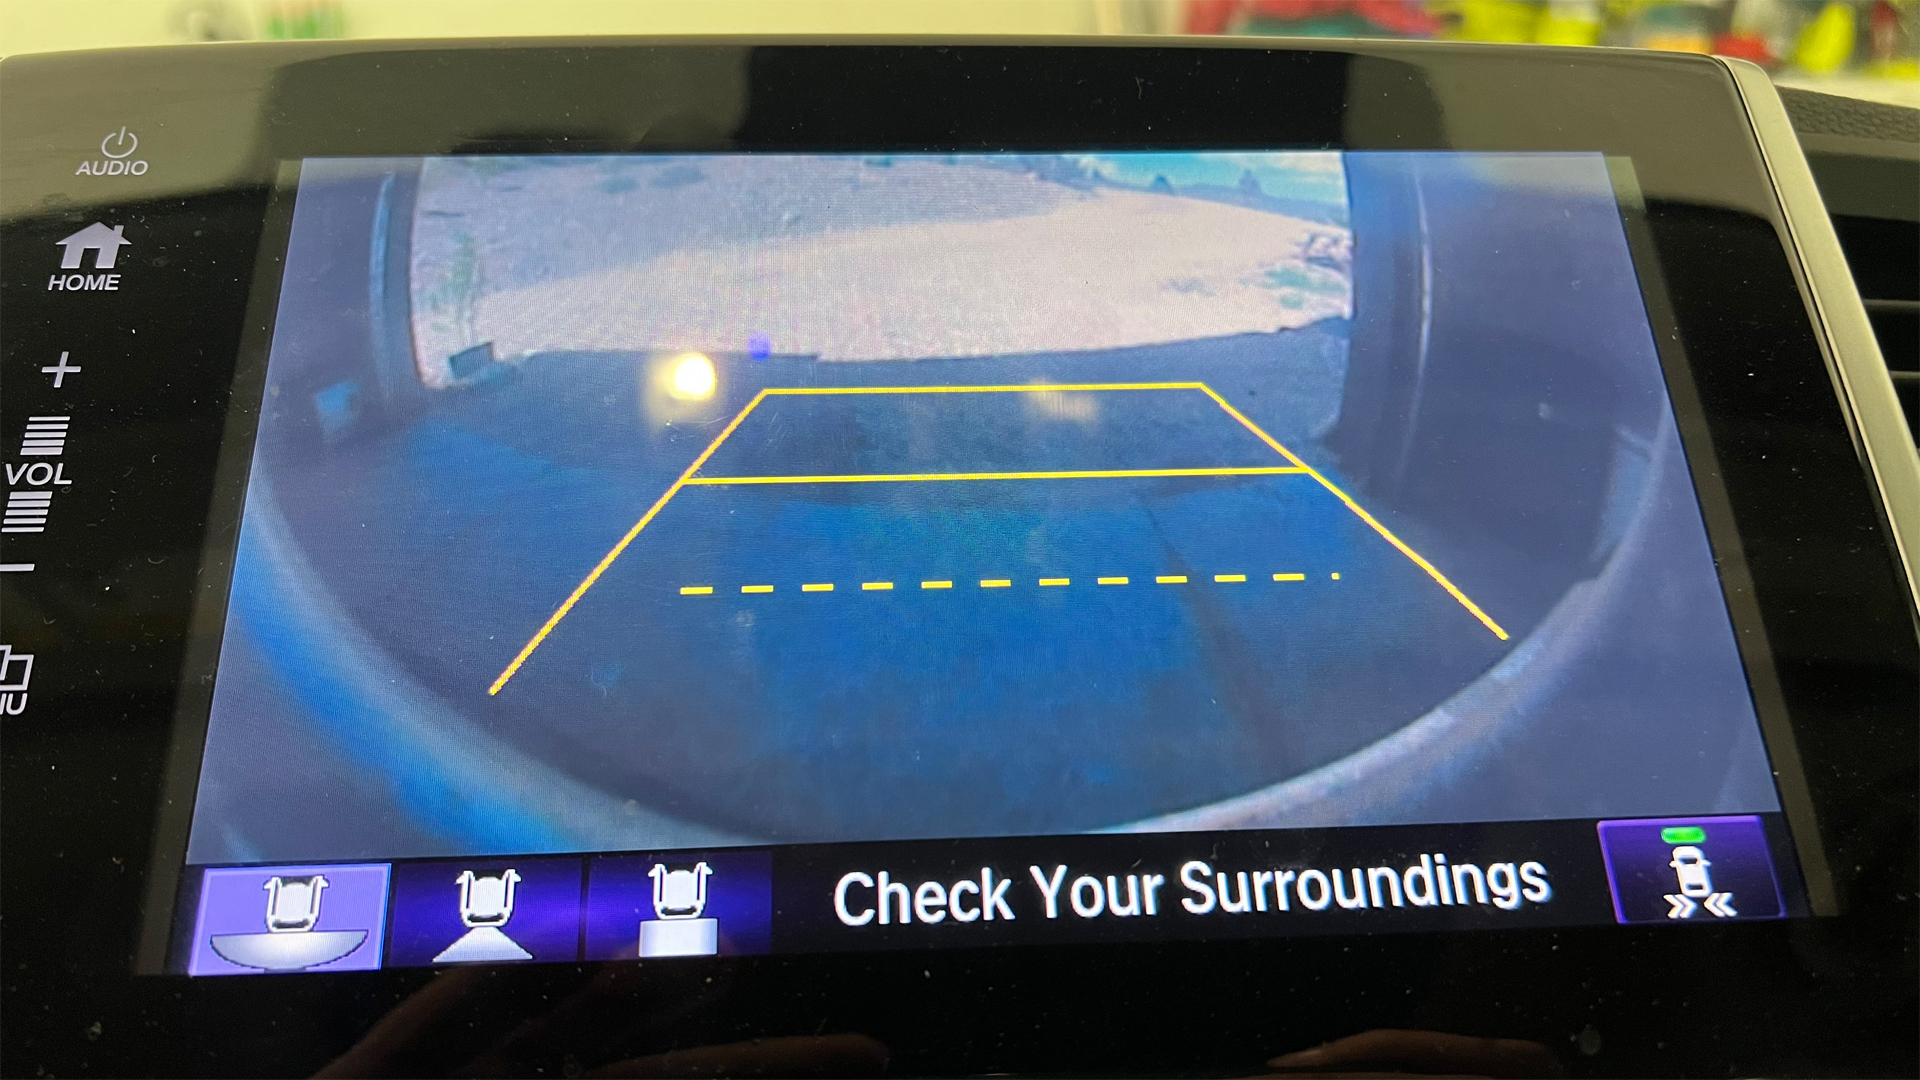 Most Backup Cameras Don't Like Bad Weather